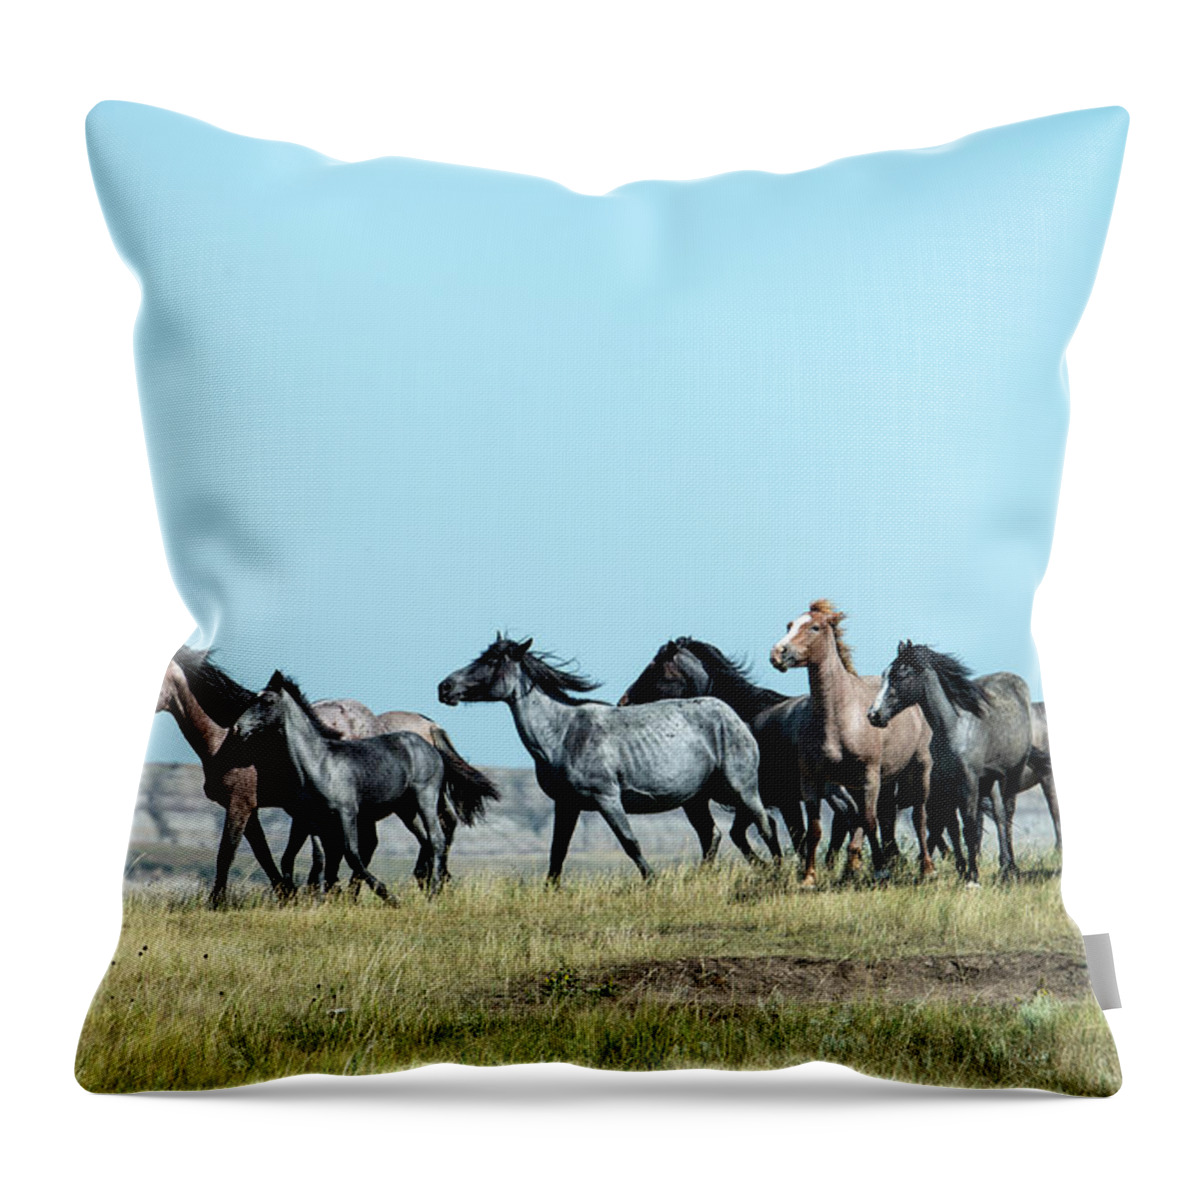 Horse Throw Pillow featuring the photograph Wild Horse In Theodore Roosevelt Natl by Mark Newman